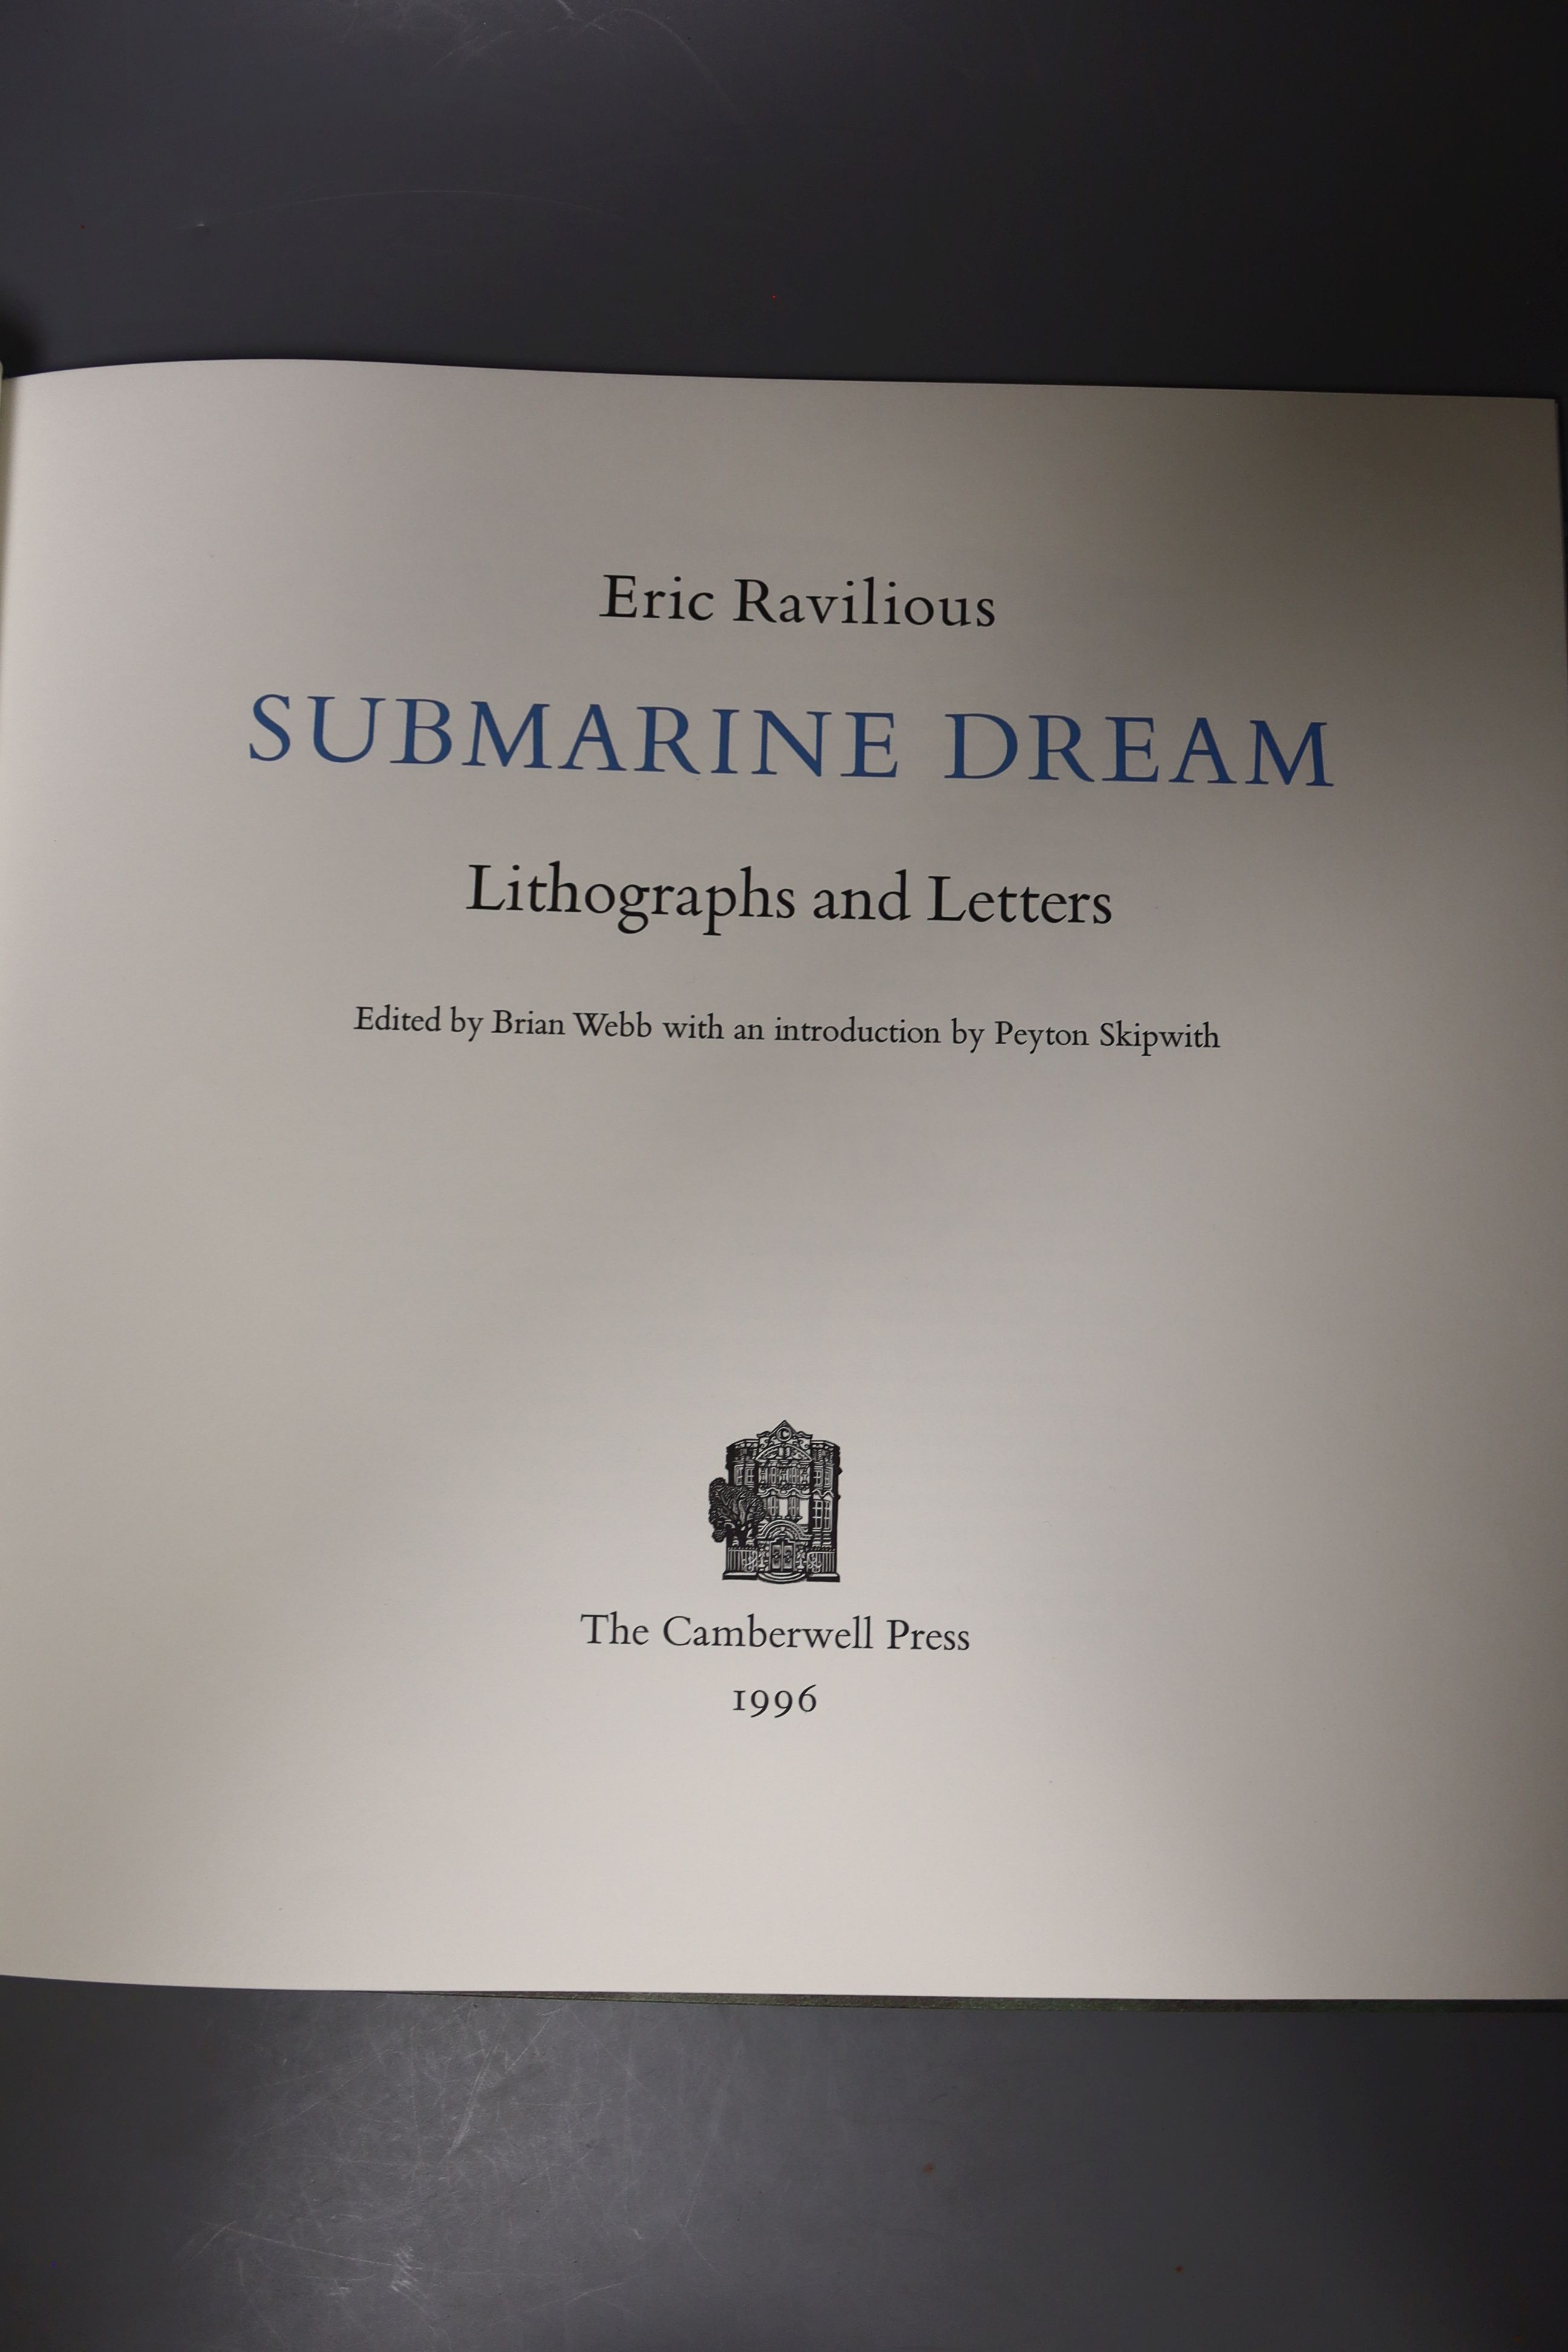 Ravilious, Eric – Submarine Dream: lithographs and letters, edited by Brian Webb with an introduction by Peyton Skipwith, limited edition (300 numbered and signed copies)